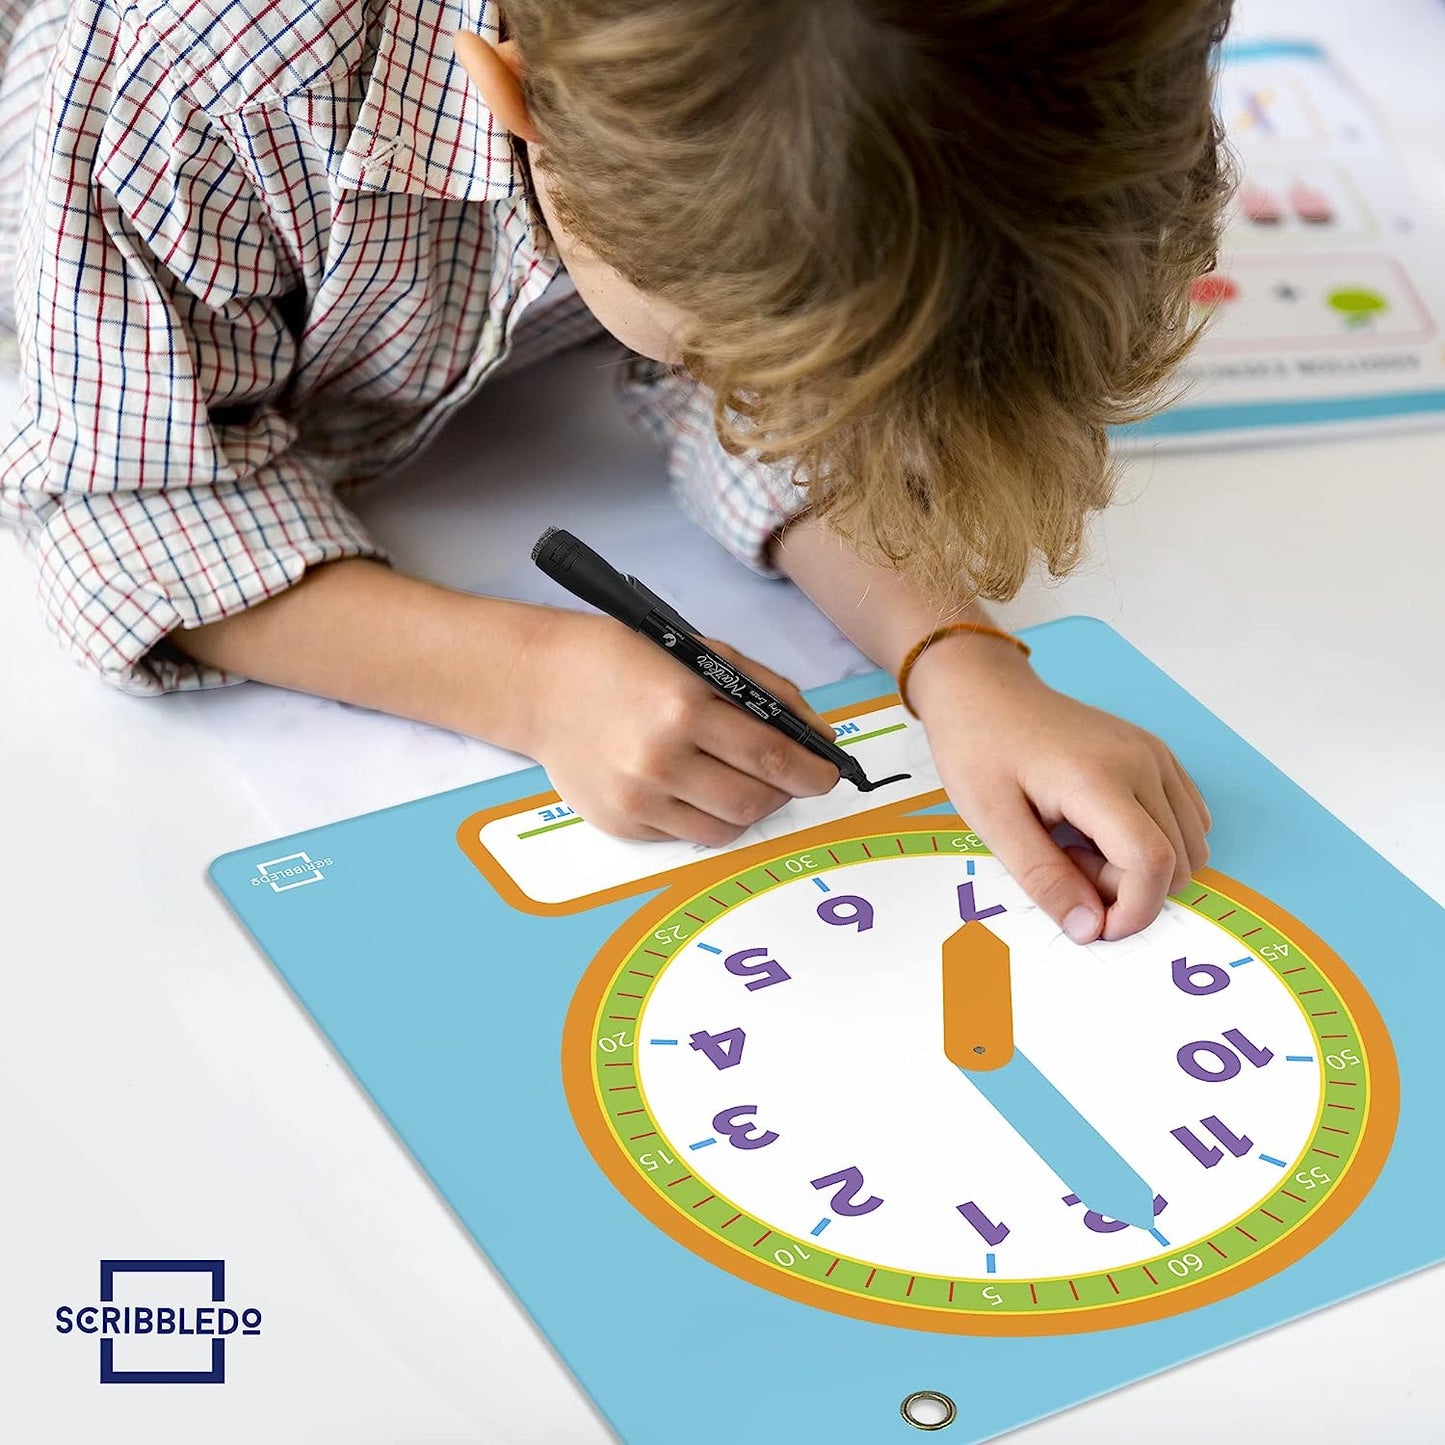 Dry Erase Learning Clock with 2 Markers